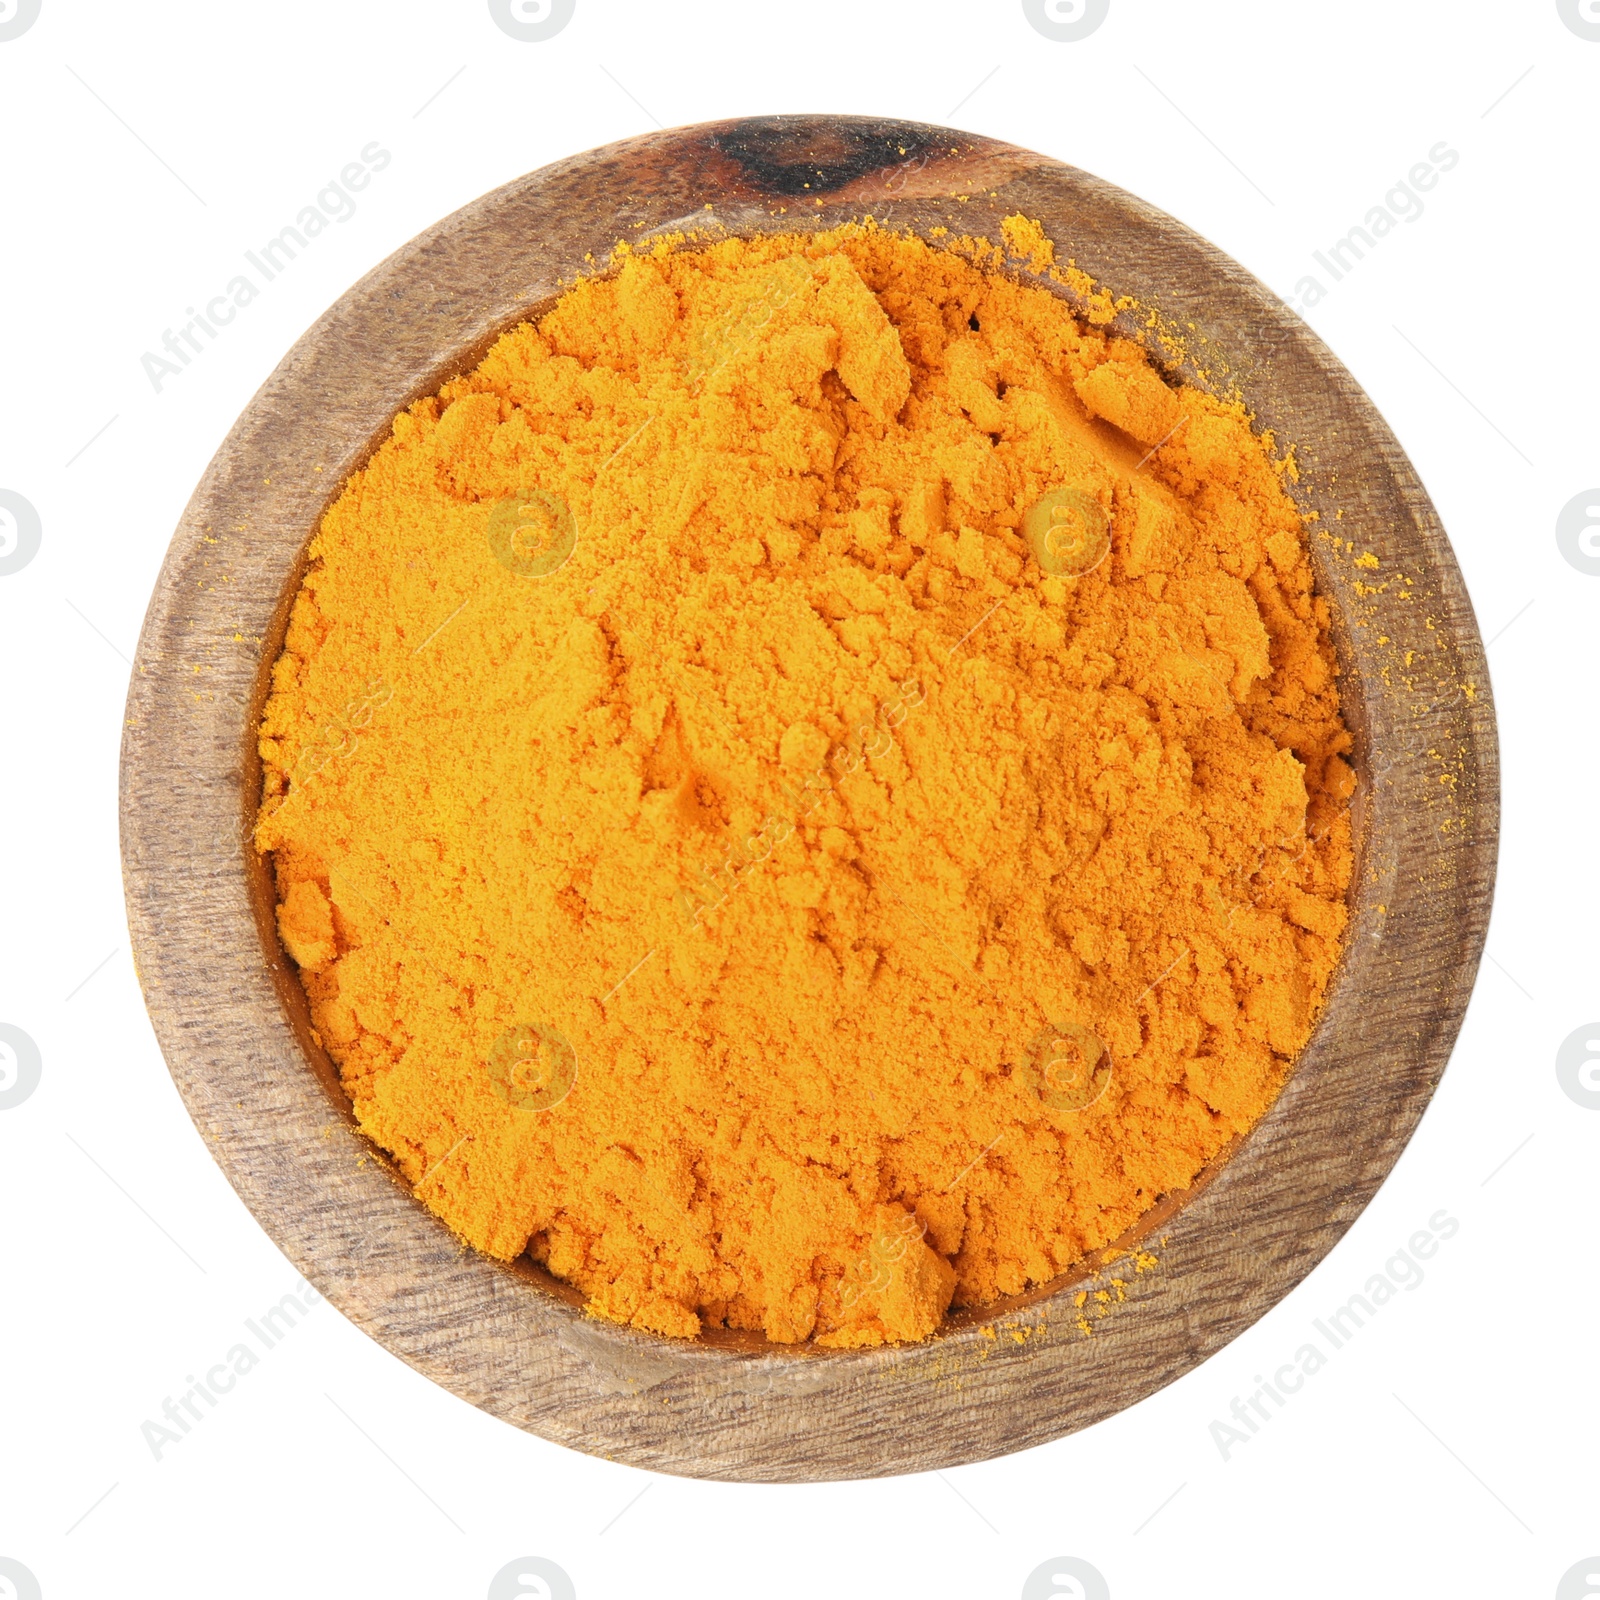 Photo of Aromatic saffron powder in bowl on white background, top view